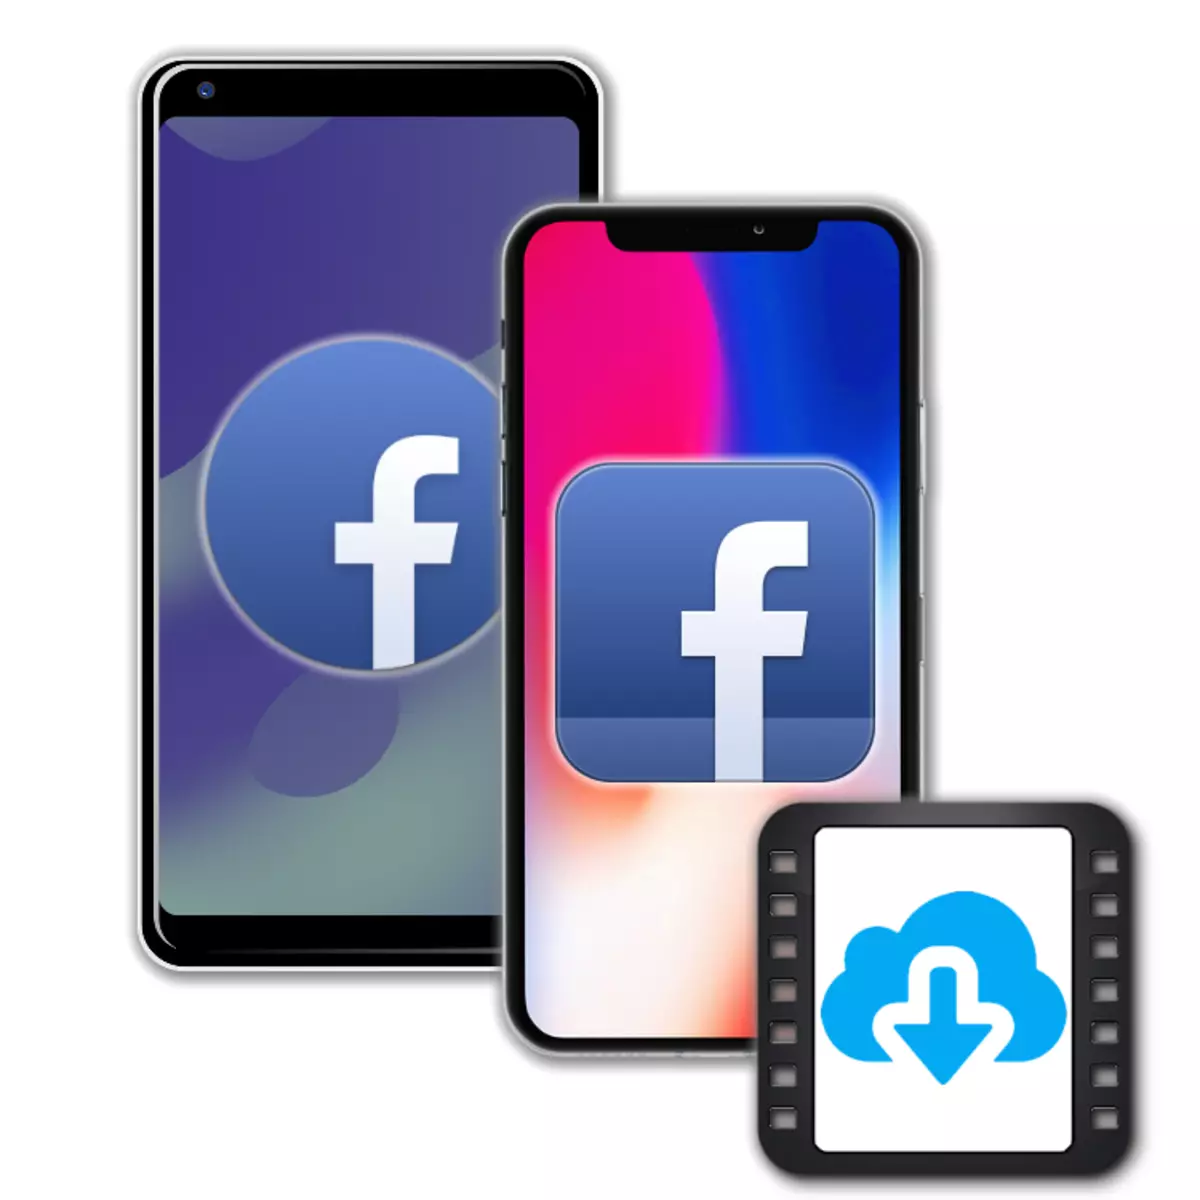 How to download video with Facebook on phone